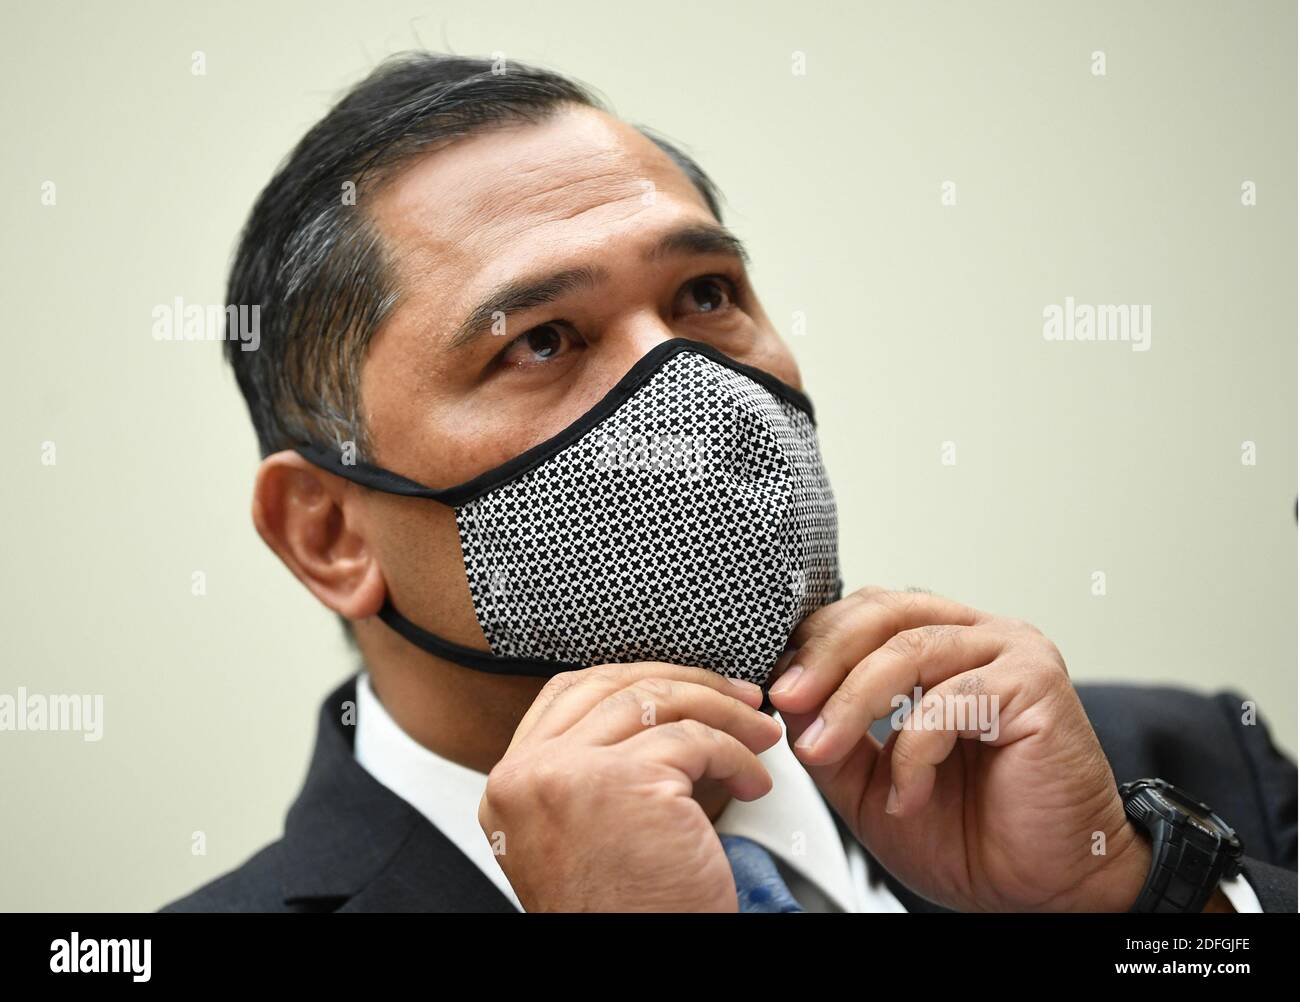 Brian Bulatao, Under Secretary of State for Management, adjusts his face mask as he testifies before a House Committee on Foreign Affairs hearing looking into the firing of State Department Inspector General Steven Linick, on Capitol Hill in Washington, D.C. on Wednesday, September 16, 2020. The foreign affairs committee issued the subpoenas as part of the panel's probe into accusations that Linick was fired while investigating Secretary of State Mike Pompeo's role in a controversial $8 billion weapons sale to Saudi Arabia. Photo by Kevin Dietsch/Pool/ABACAPRESS.COM Stock Photo